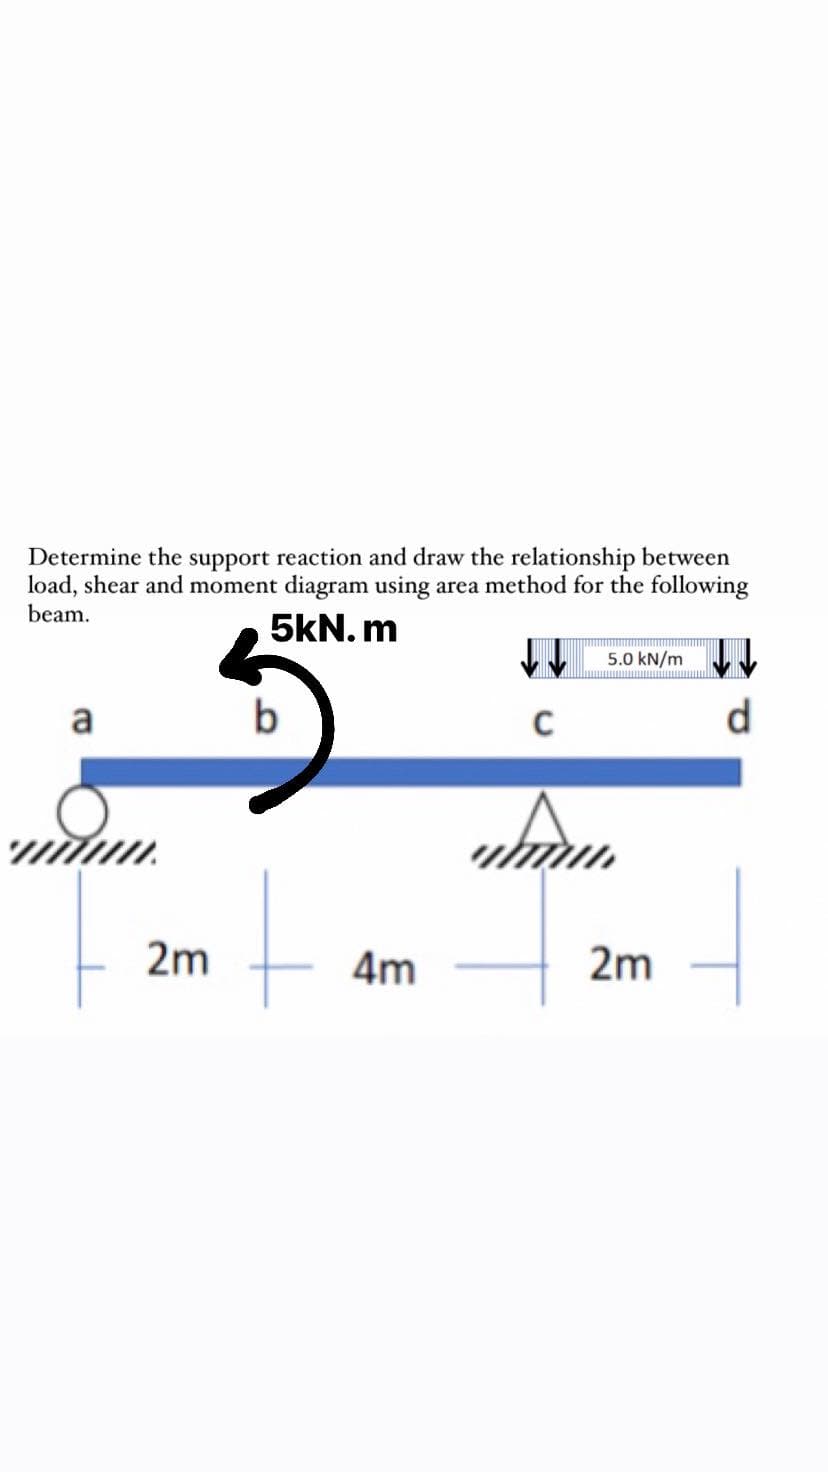 Determine the support reaction and draw the relationship between
load, shear and moment diagram using area method for the following
beam.
5kN.m
a
www.
2m
b
4m
↓↓↓ 5.0 kN/m
C
wha
2m
d